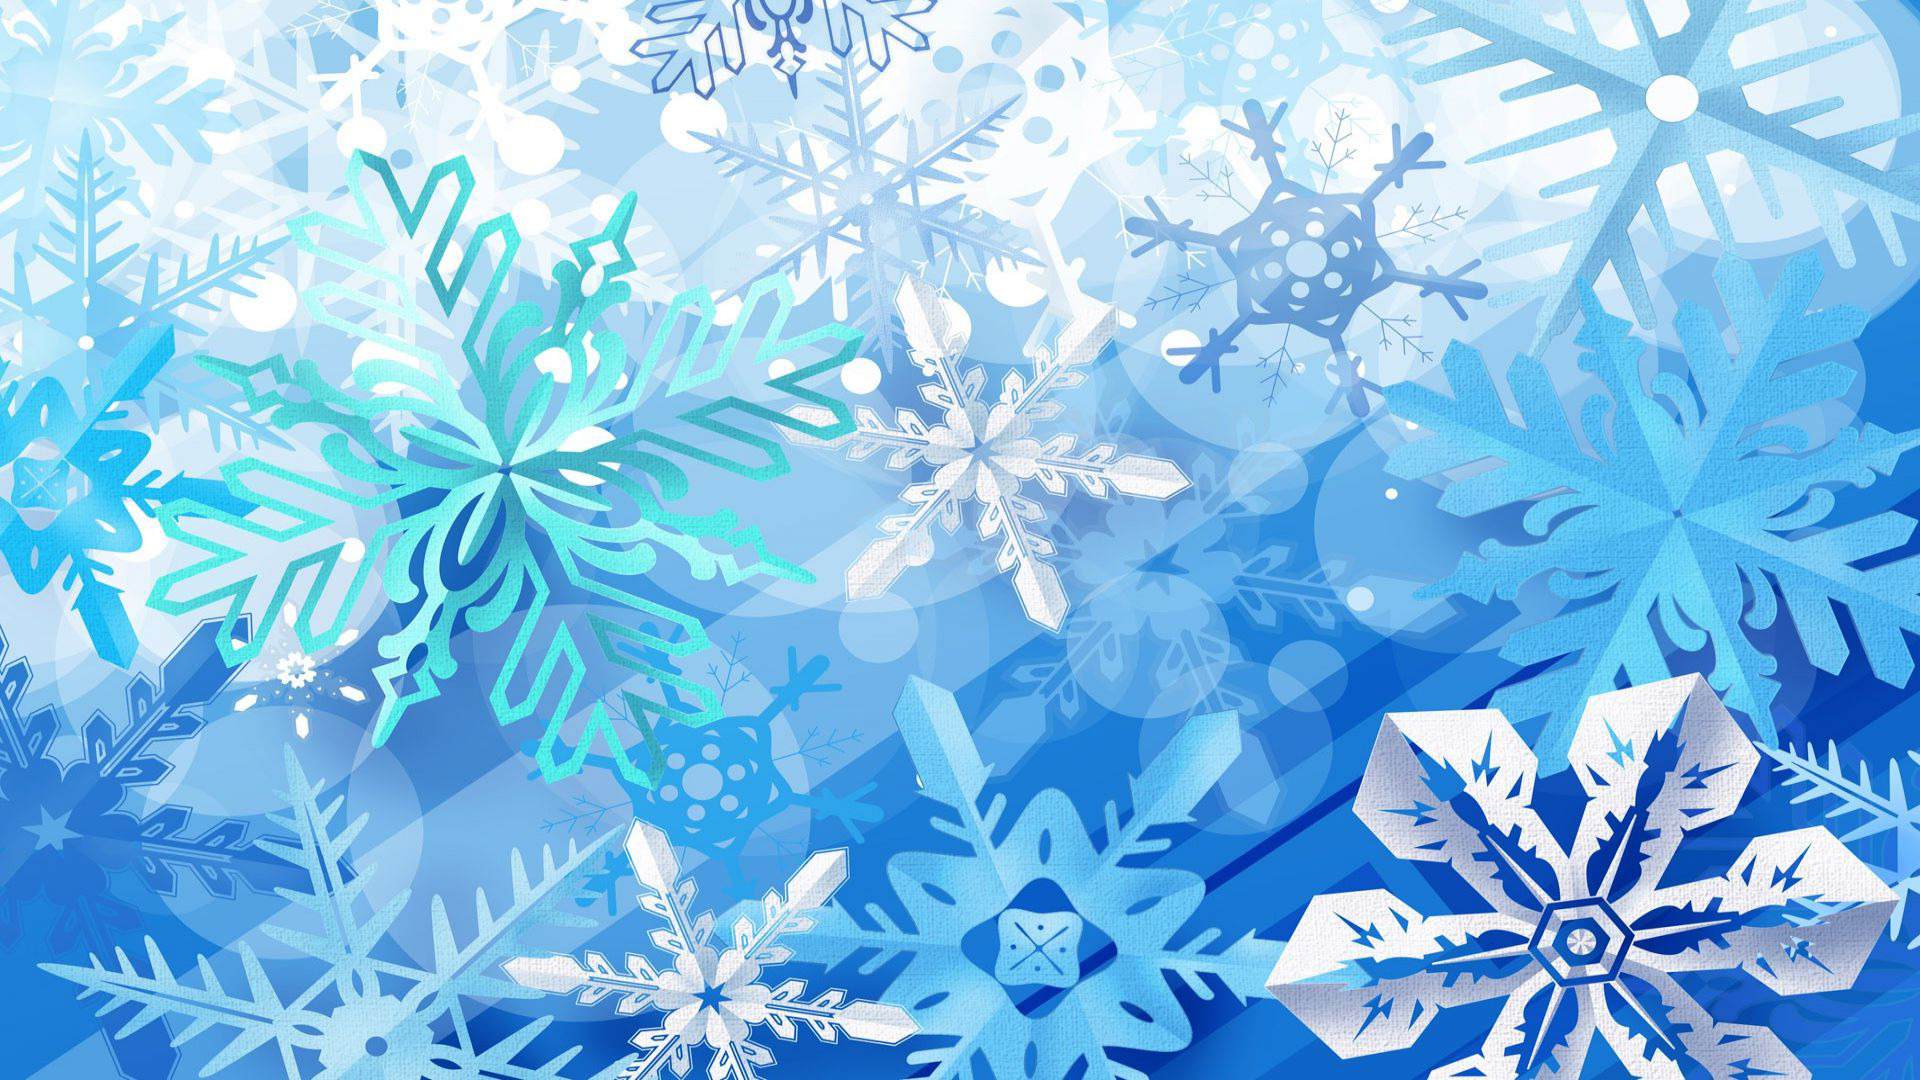 Snow Background Wallpaper High Definition Quality Widescreen